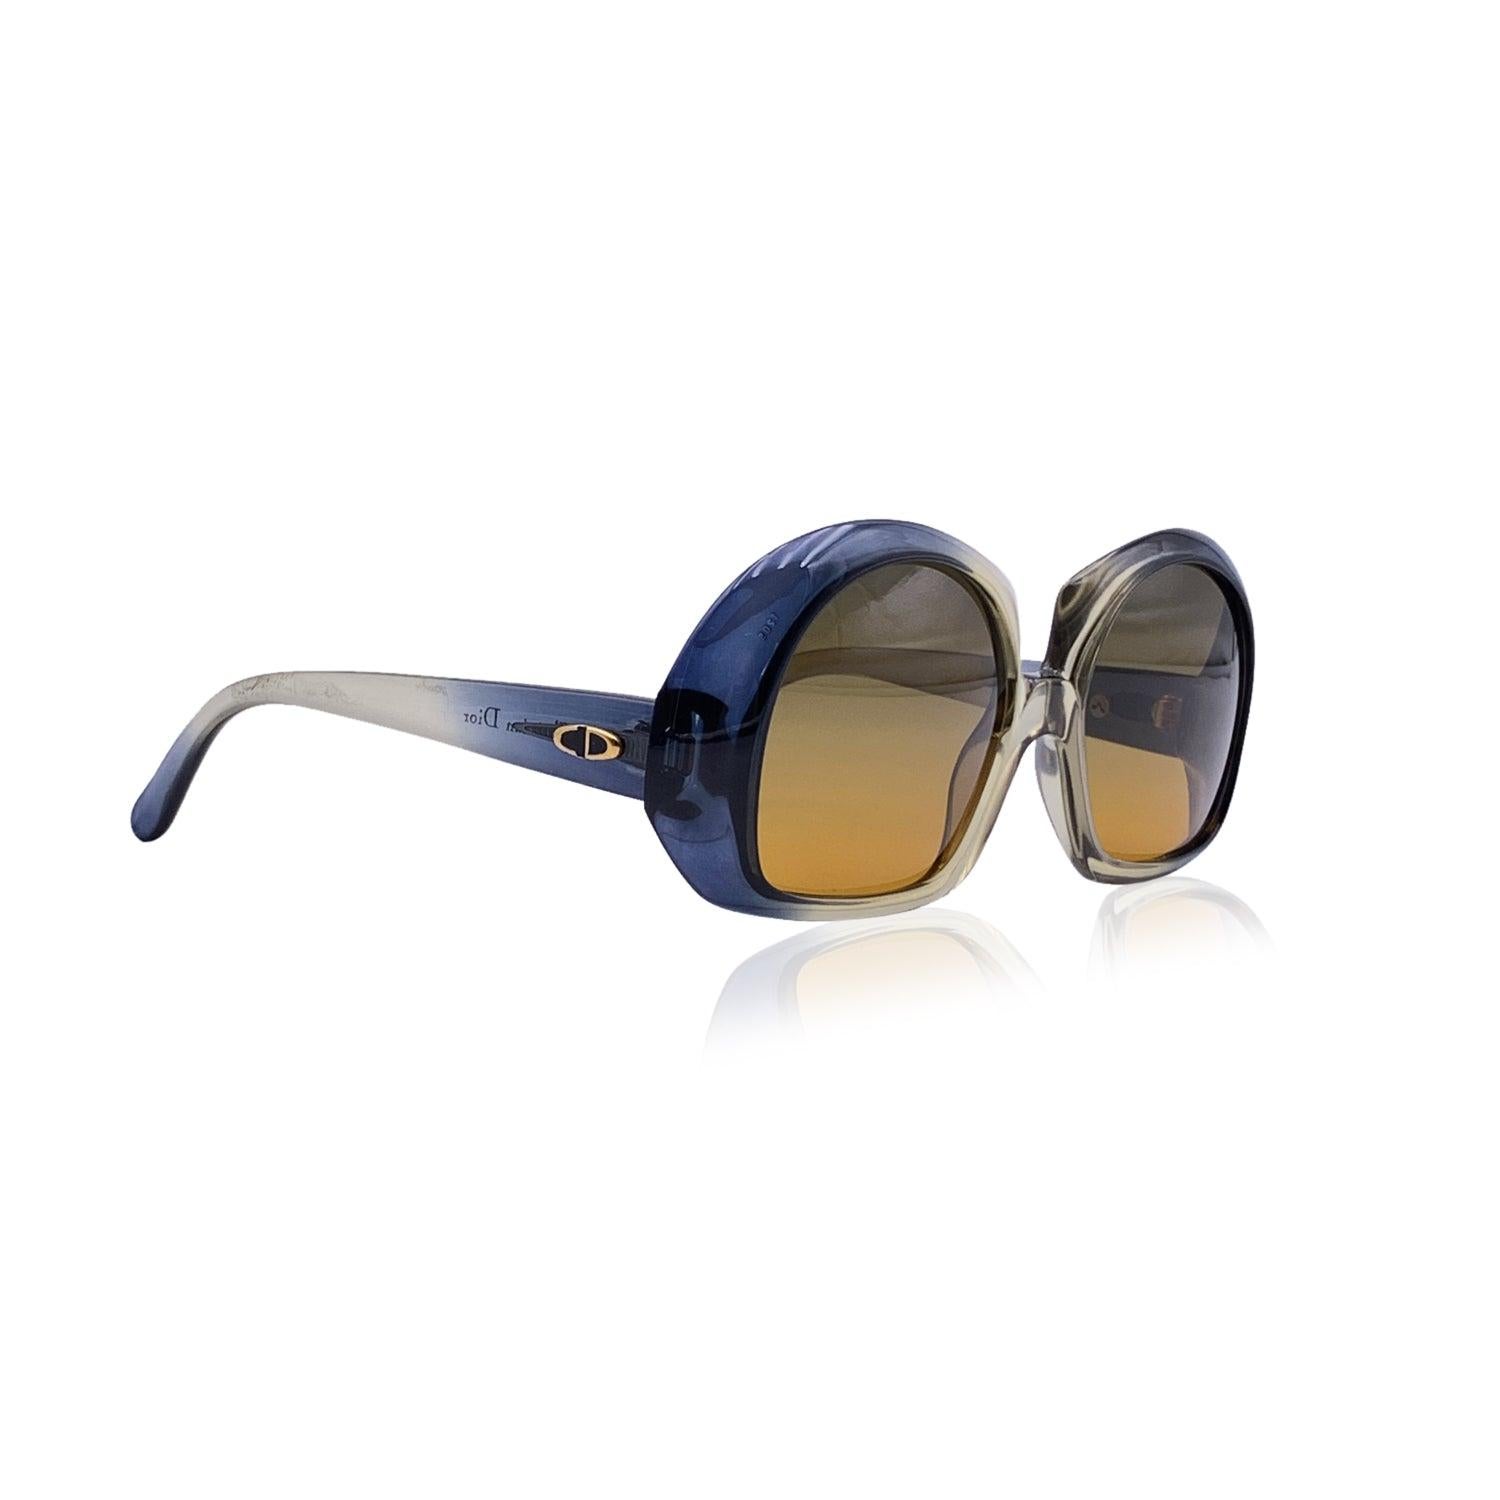 Vintage Christian Dior oversize sunglasses, Mod. 1205- Col D 560. Ombré transparent blue and amber Optyl frame. 100% Total UVA/UVB protection in gradient yellow color (from green to yellow). CD logo on temples. Made in Germany Details MATERIAL: